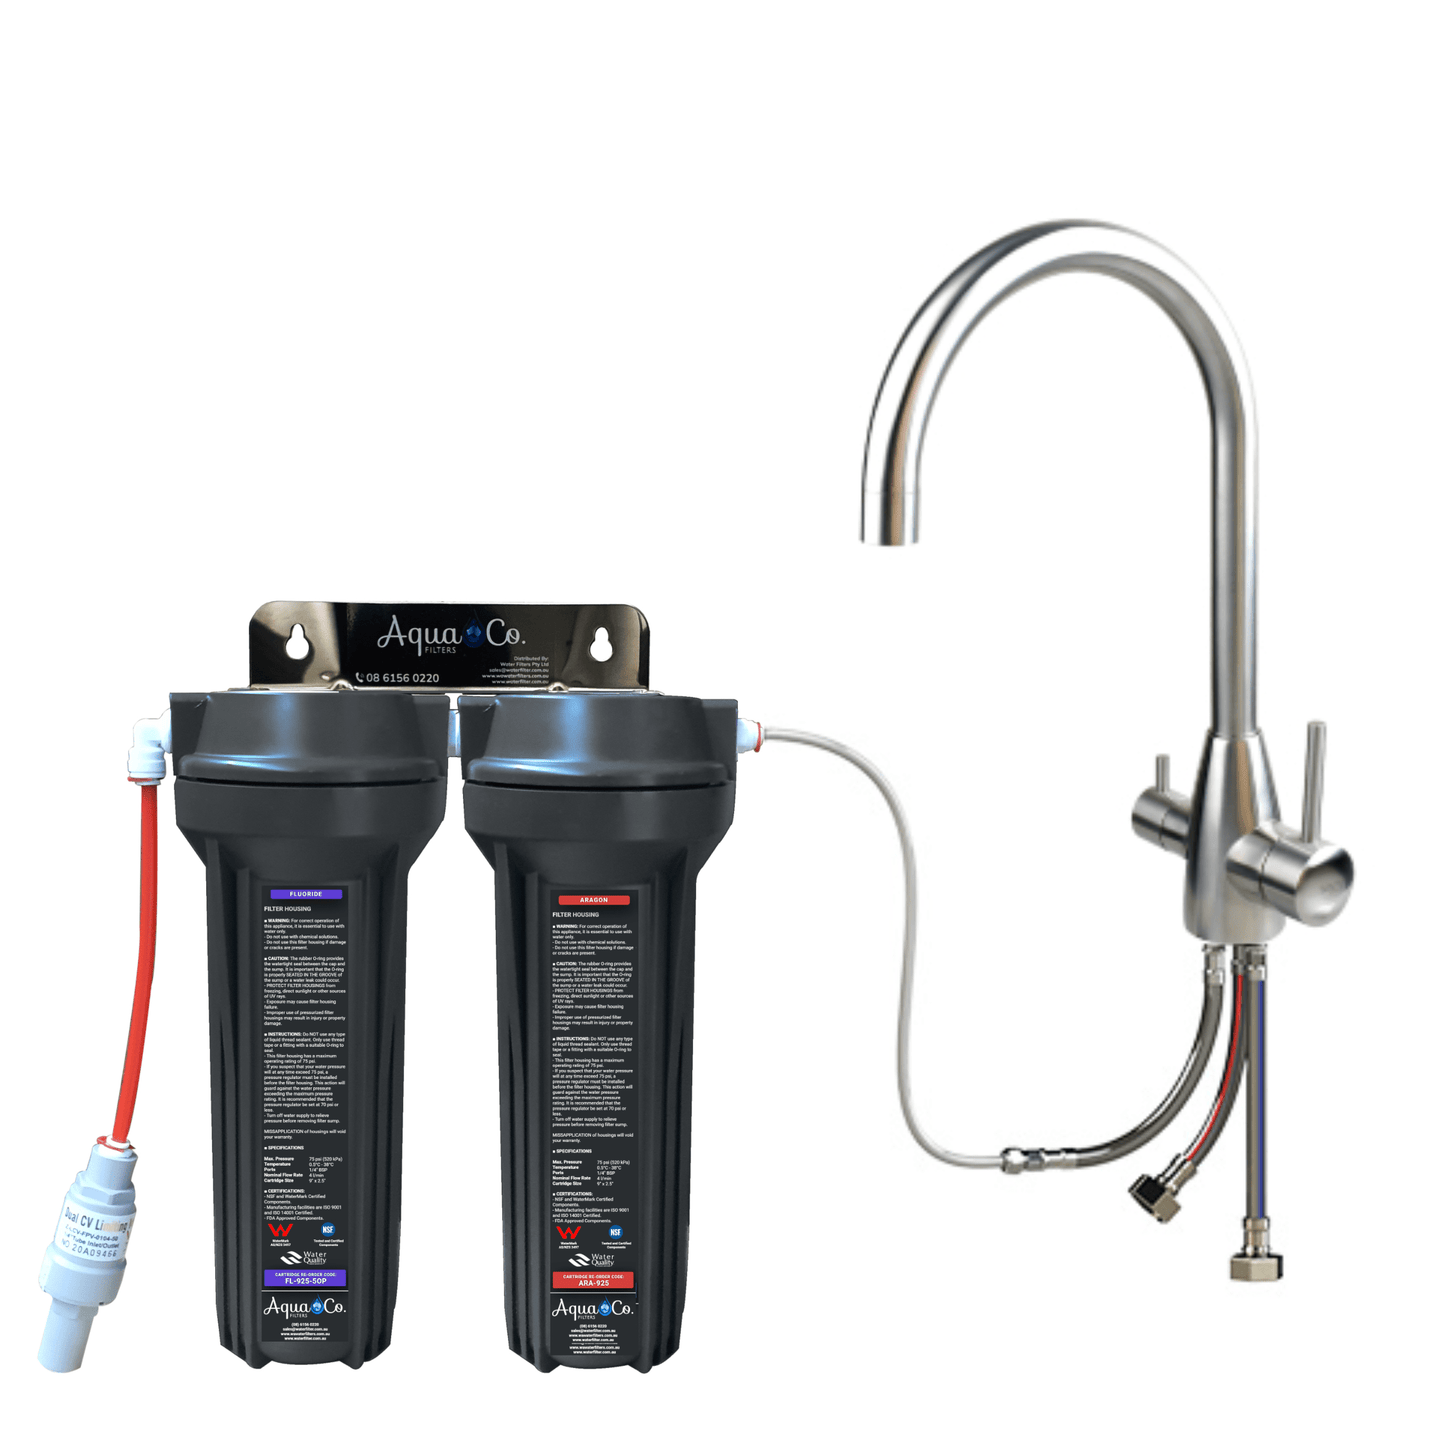 3 Way Mixer Tap with AquaCo SYS-925FA Undersink Water Filter - Reduces Chlorine, Taste, Odours, Parasites, Bacteria, Lead and Fluorides.